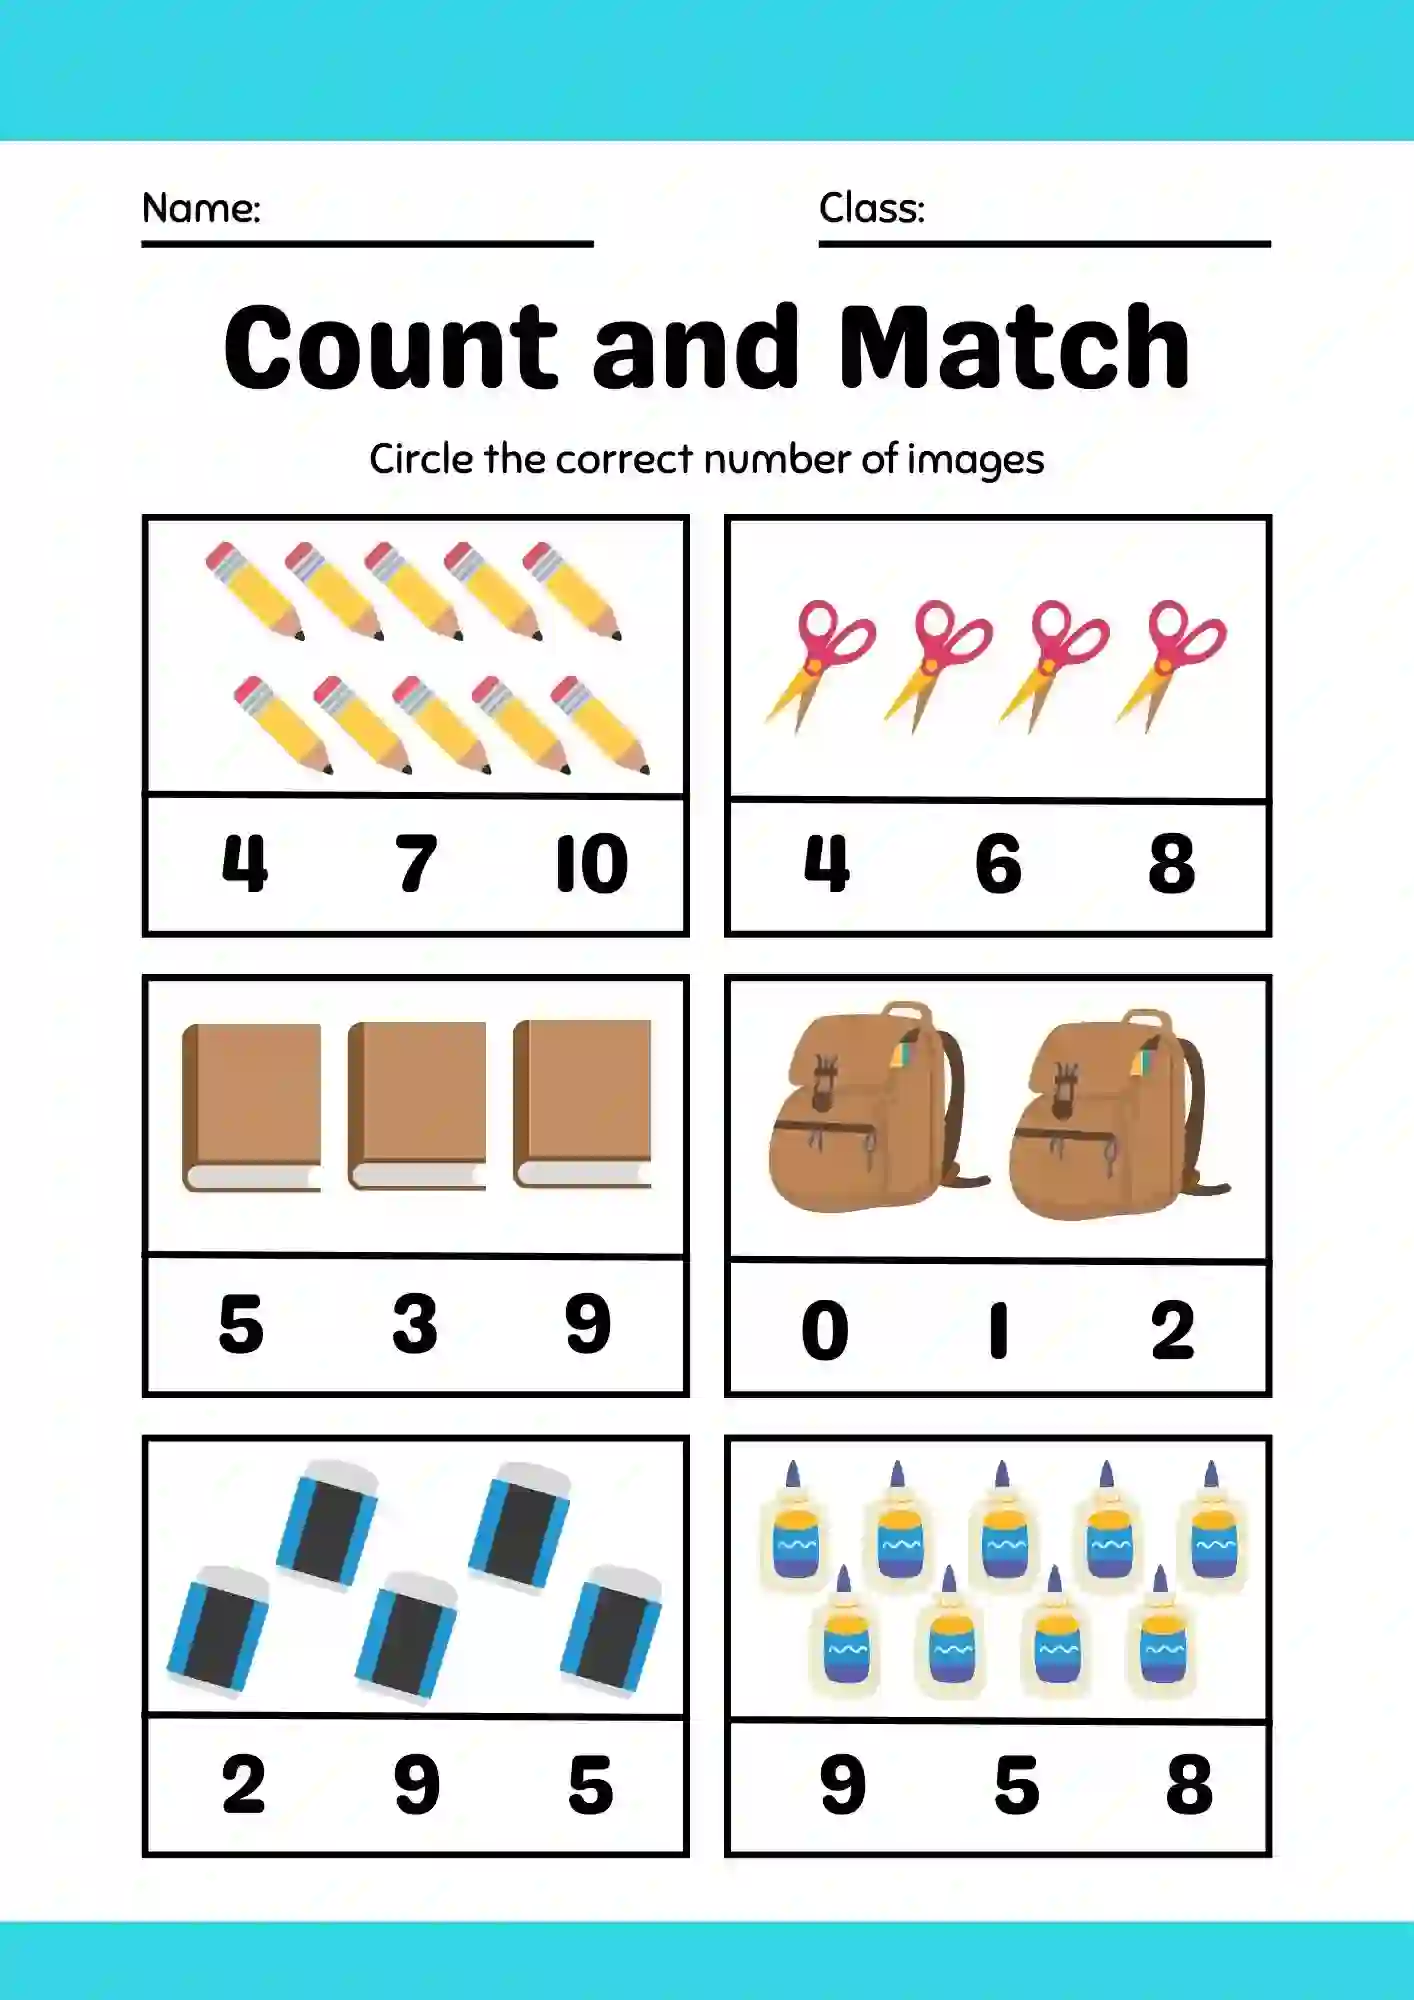 Count and Match Worksheet 2